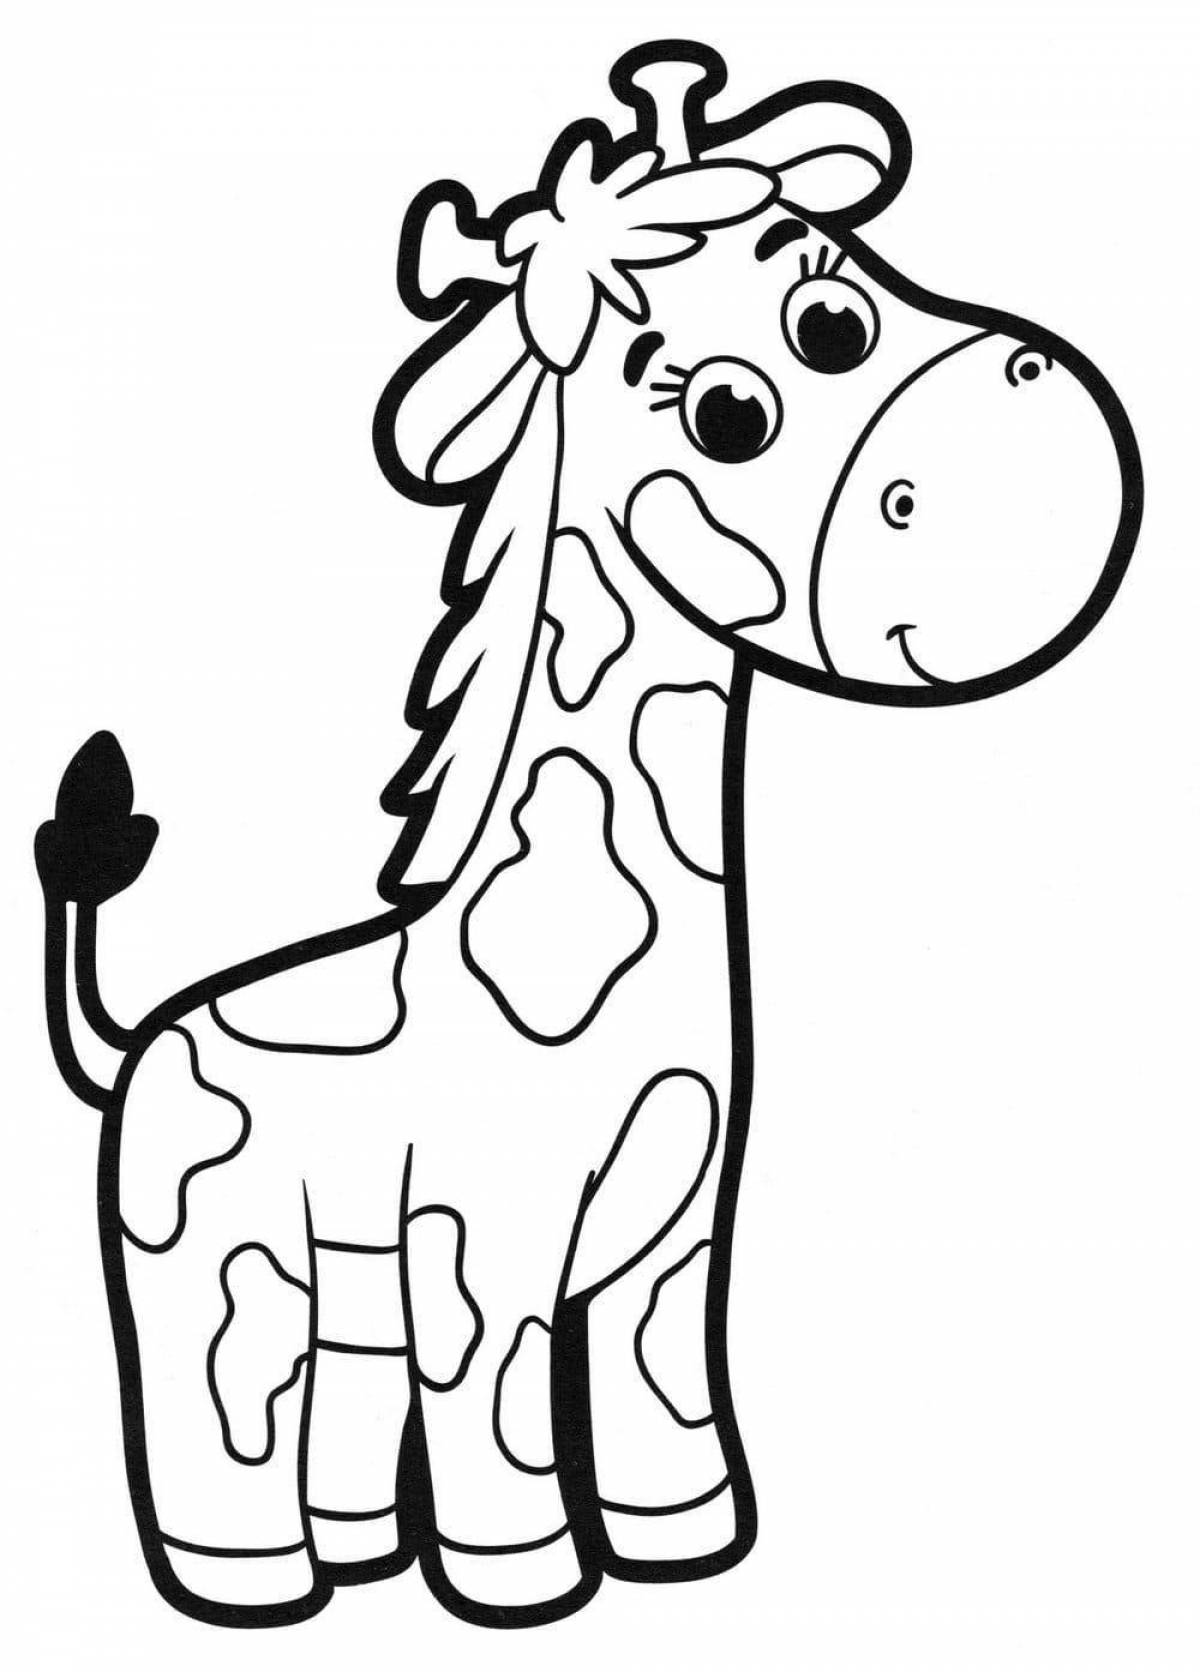 Exciting giraffe coloring book for 3-4 year olds